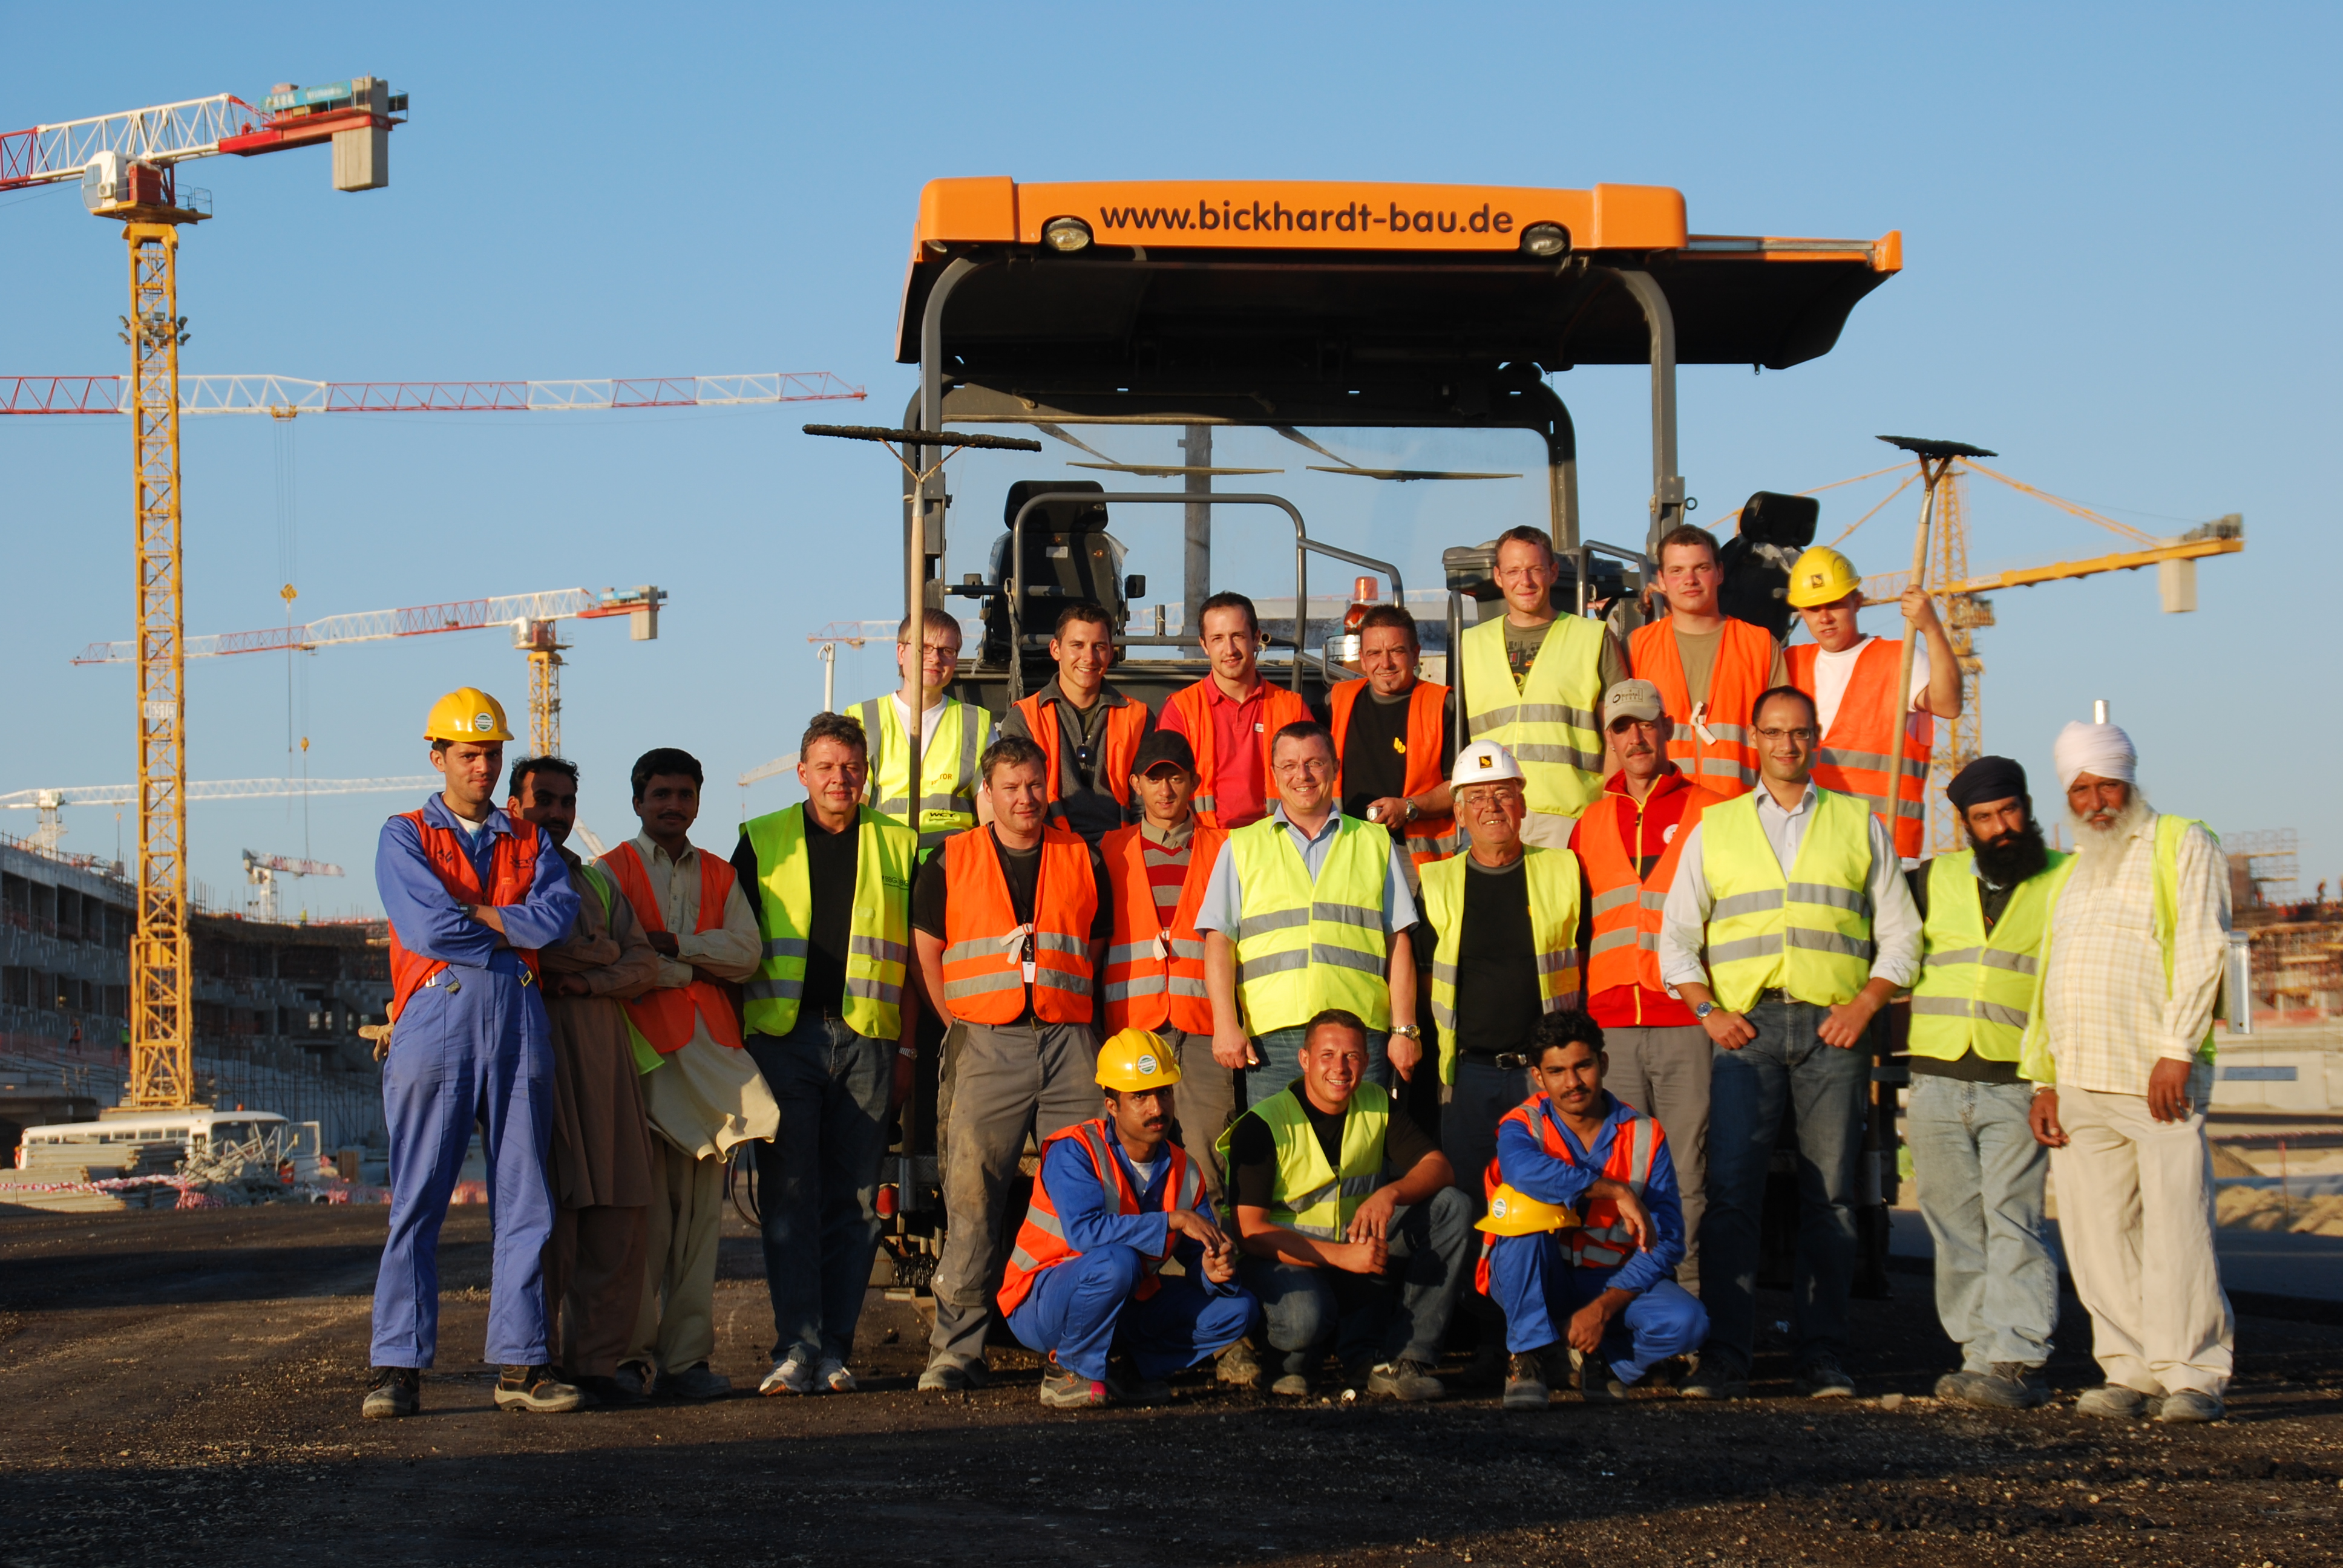 Quick camera stop: The team of the Bickhardt Bau AG. 150 degree-asphalt and up to 50 degrees of subtropical heat and humidity had even the most seasoned specialists soon dripping in sweat!